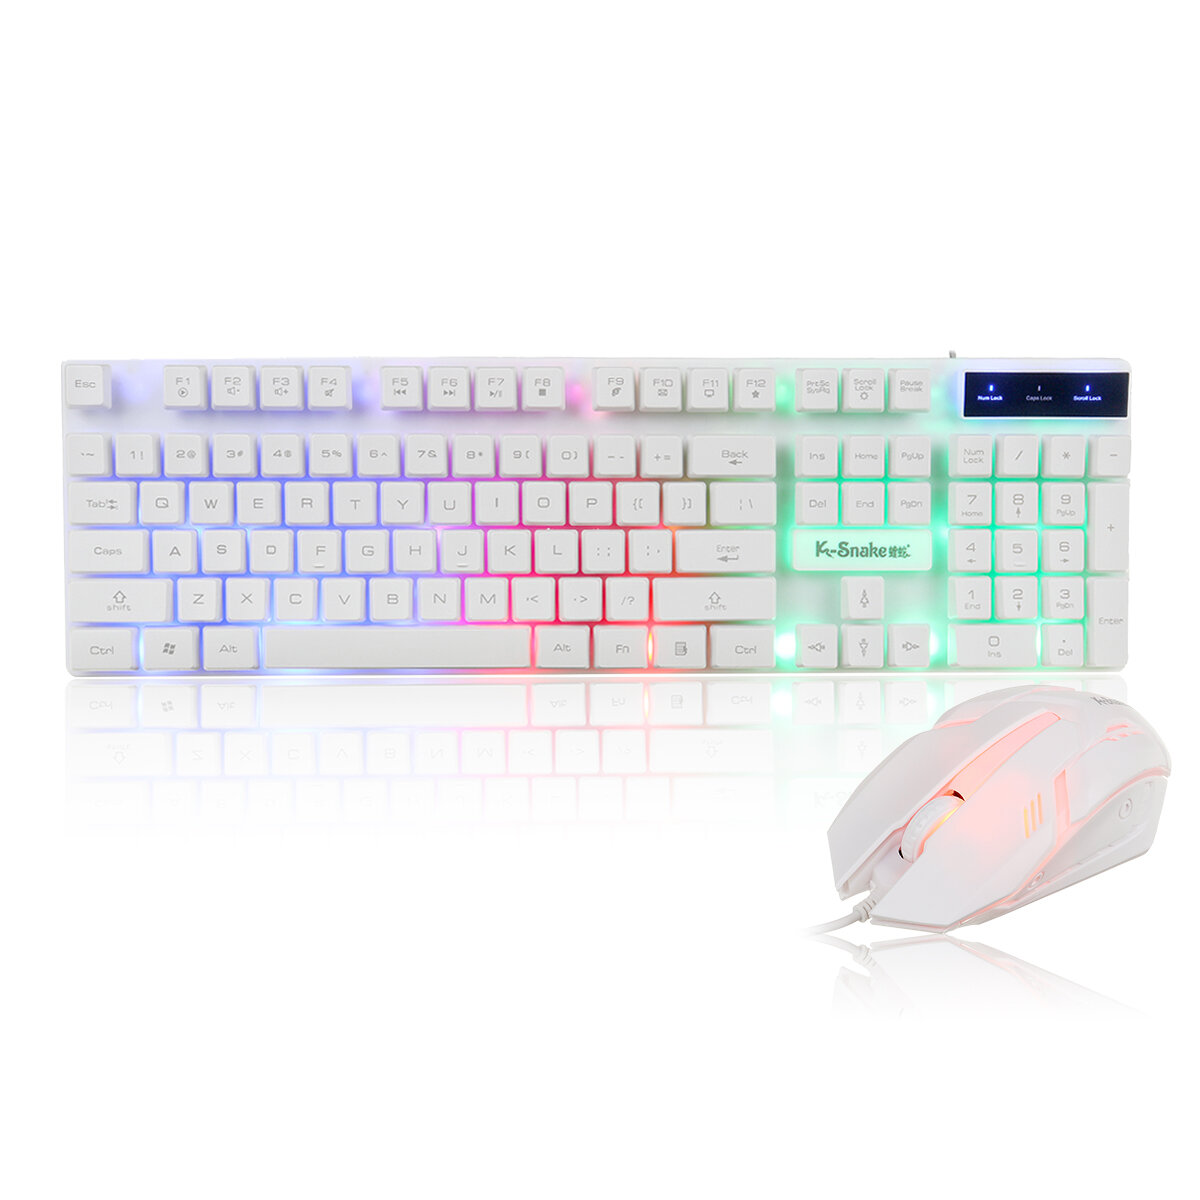 

KM320 Wired Keyboard & Mouse Set 104 Keys USB Wired Gaming Luminous LED Backlight Keyboard Mouse Combo Home Office Kit f